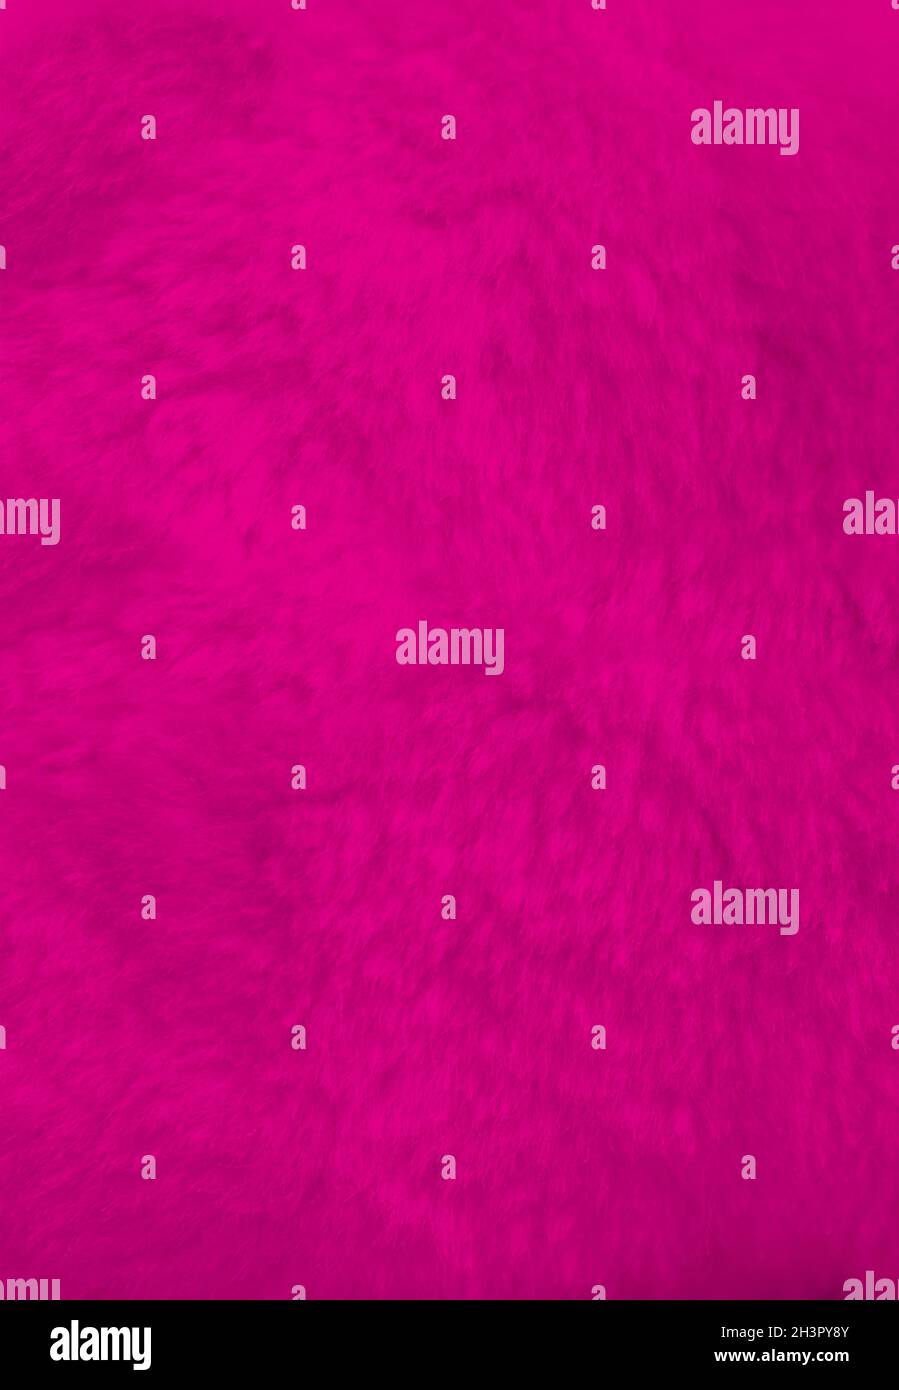 Pink fur background close up view. Stock Photo